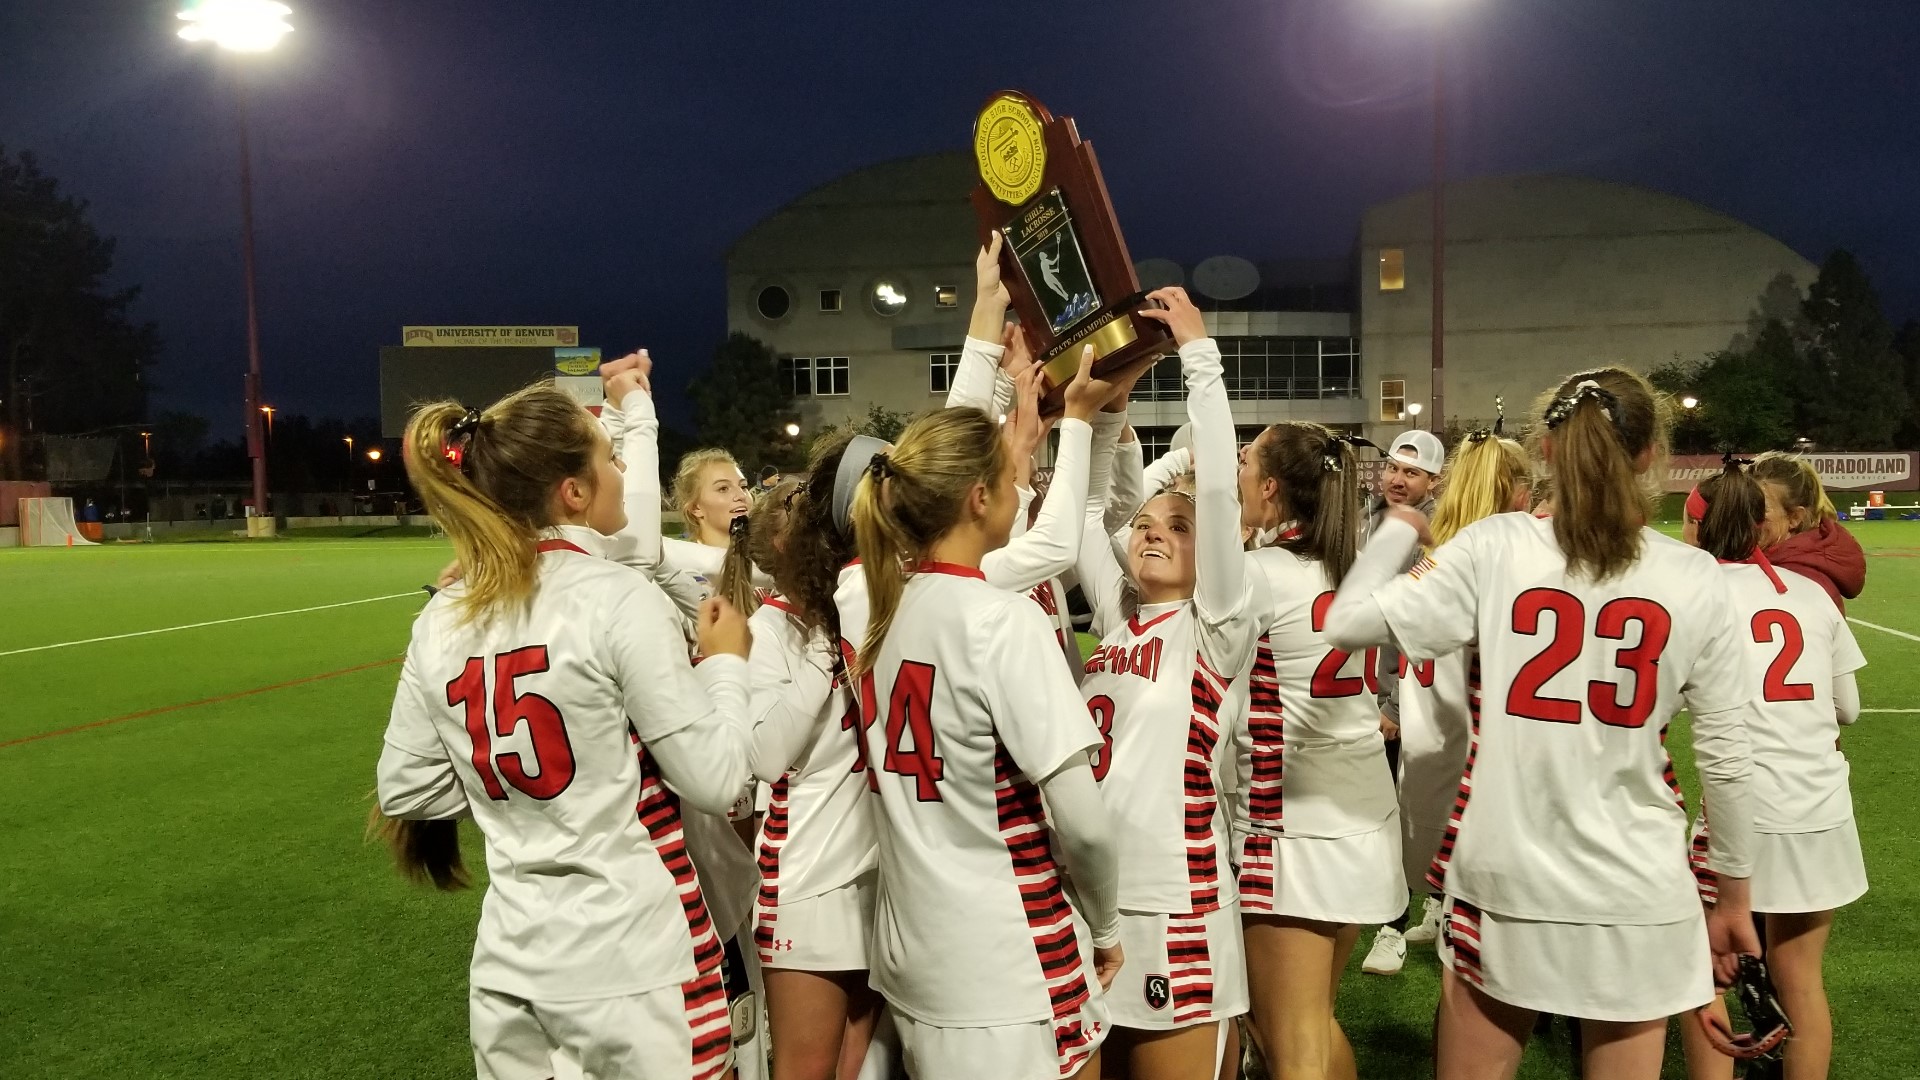 The Mustangs defeated Cherry Creek in the state championship game for the fifth-straight year on Wednesday night.